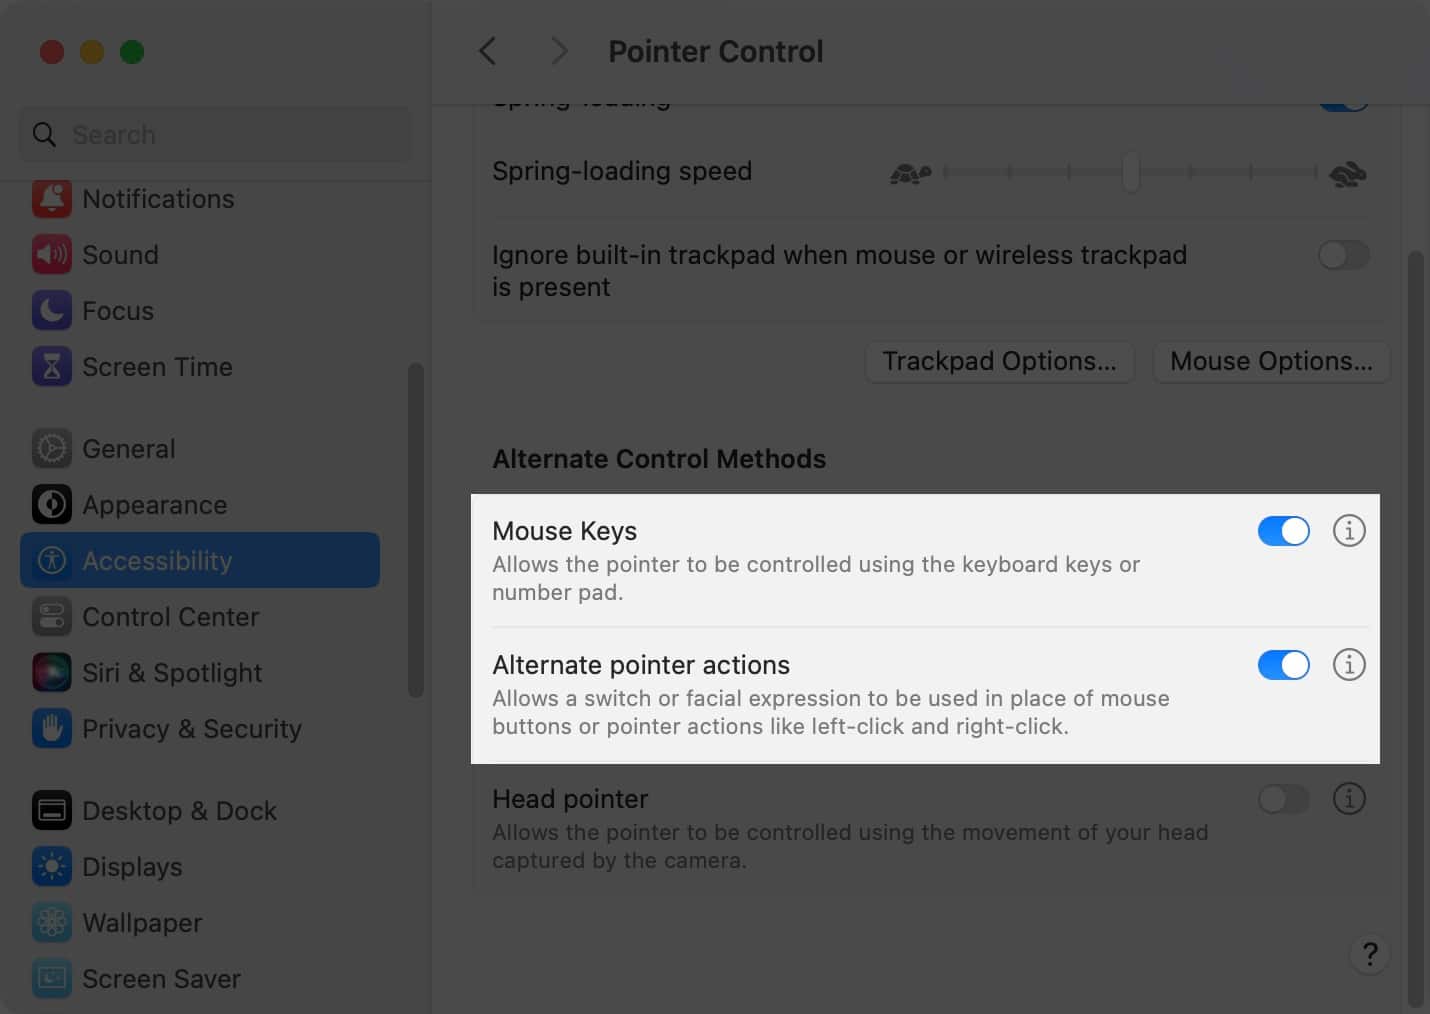 Enable Mouse Keys and Alternate pointer actions in Pointer Control under Accessibility Settings